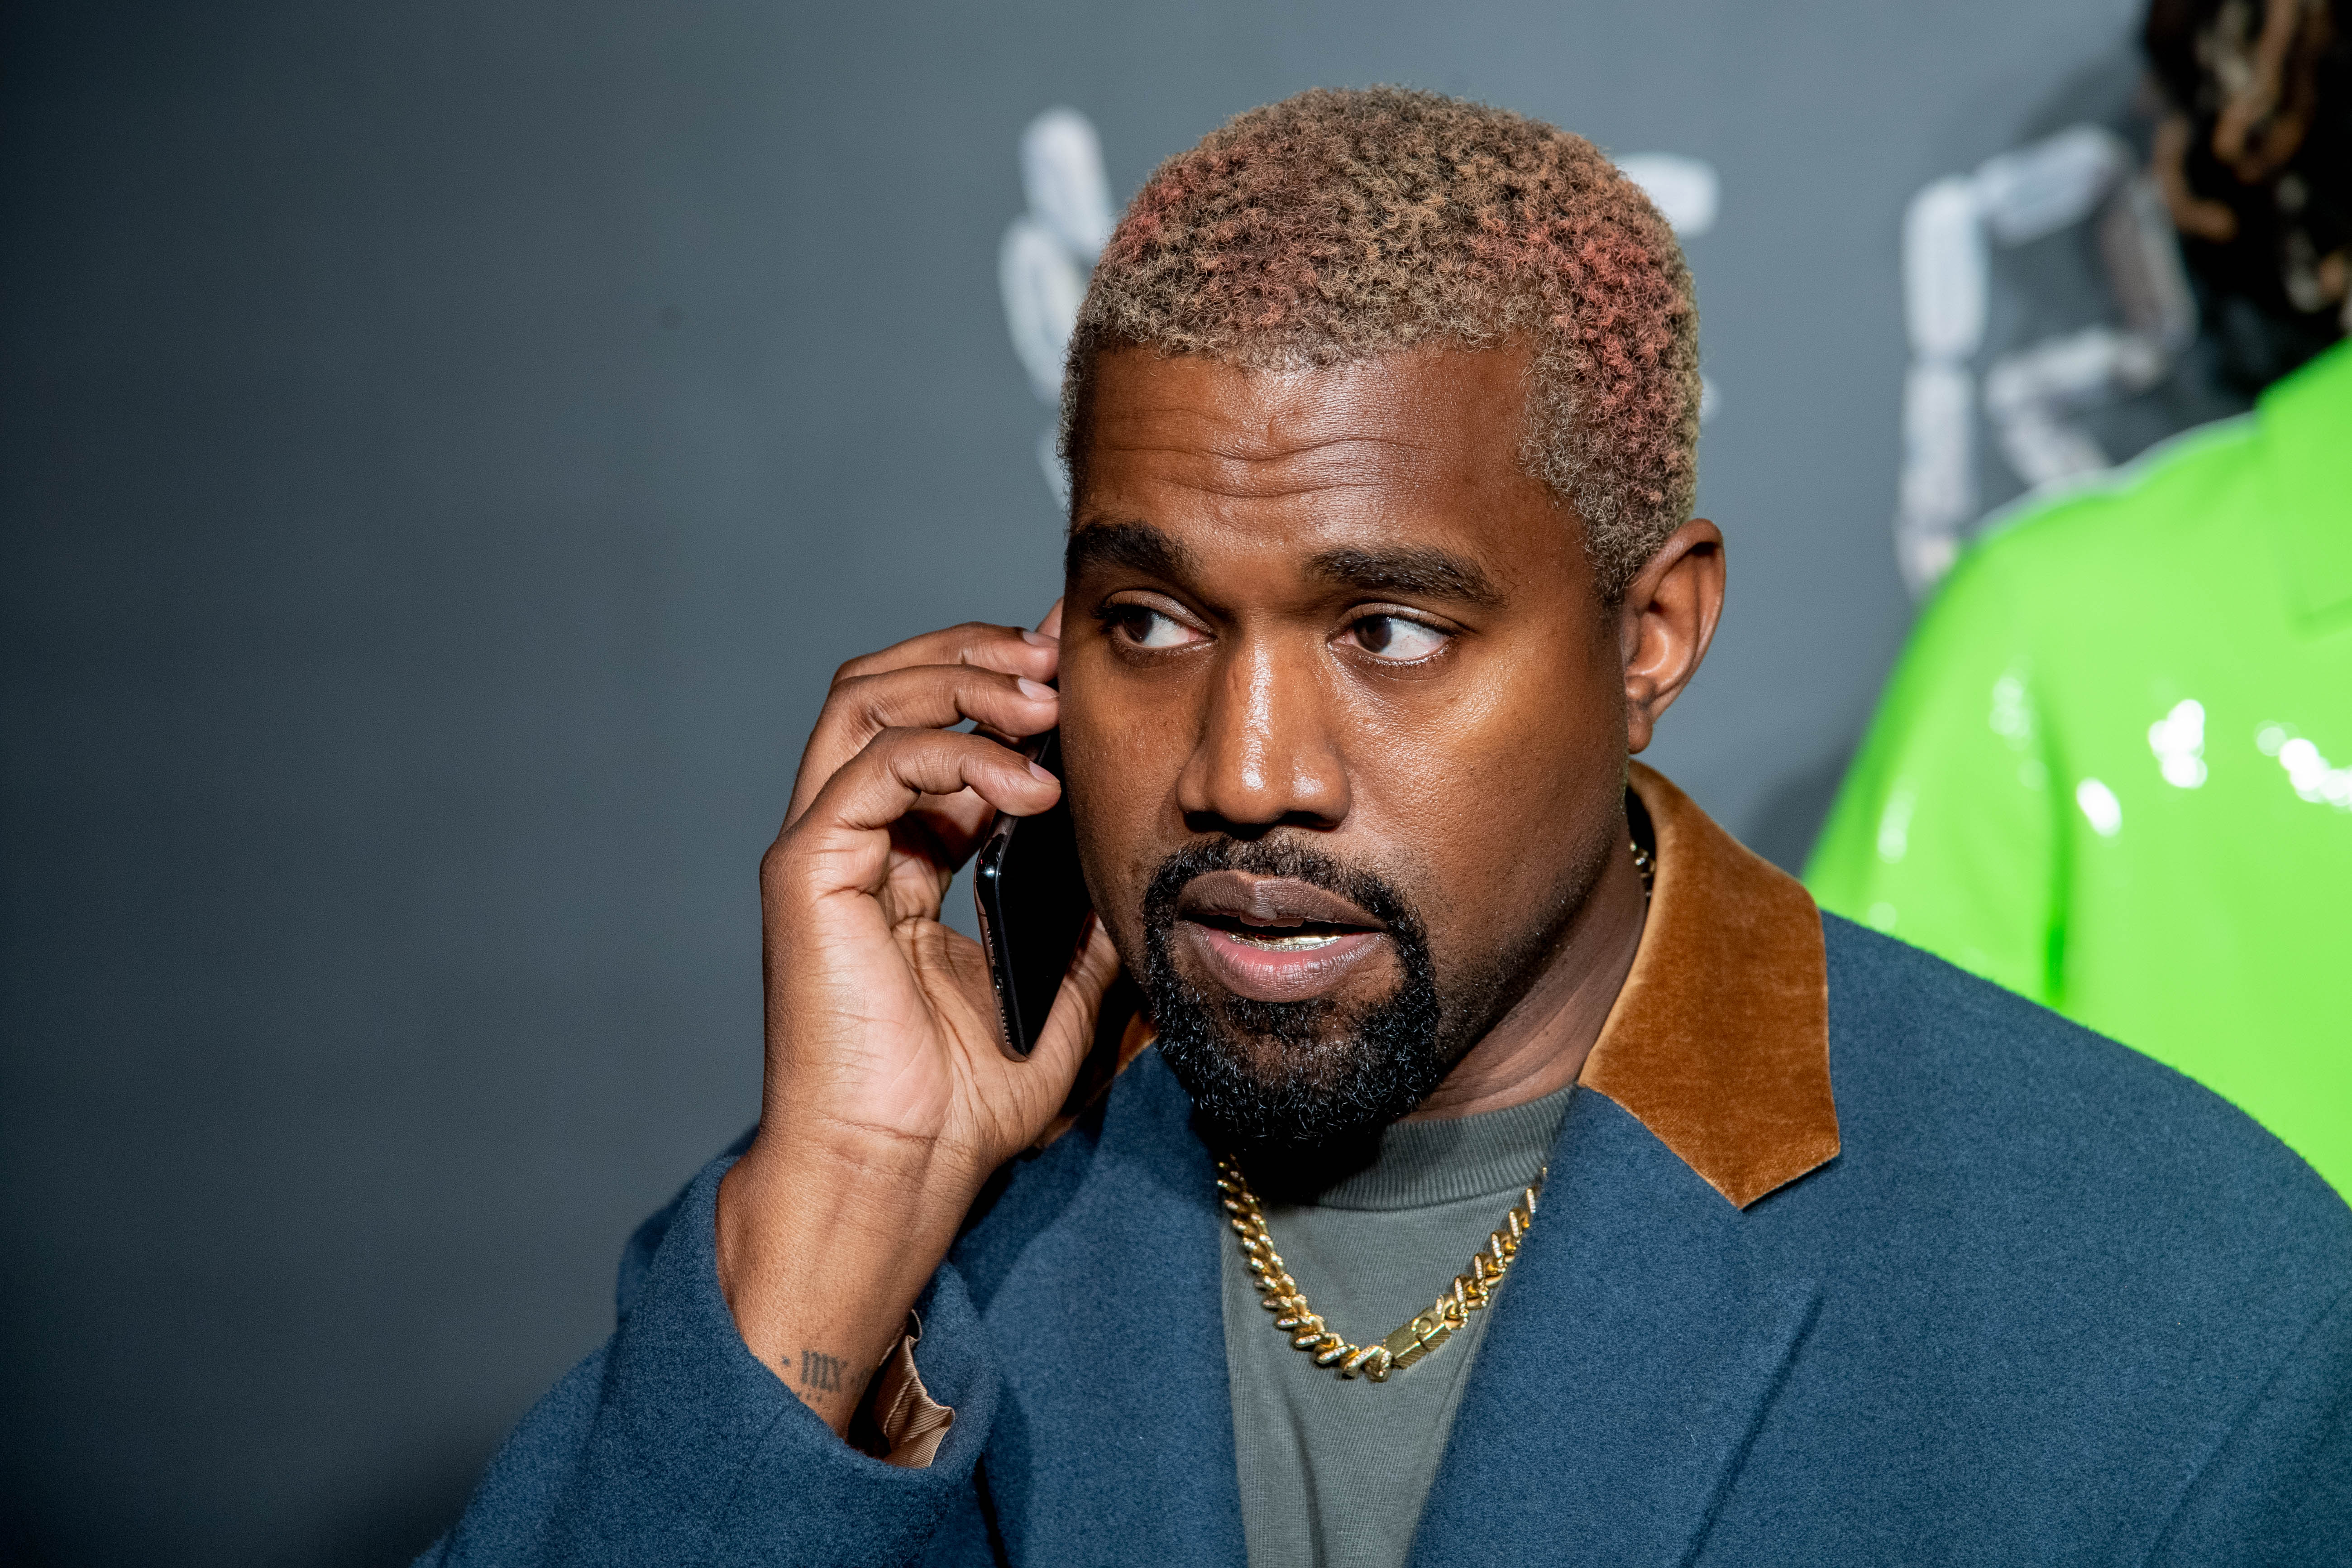 Kanye Turns His Trigger Fingers To Twitter Fingers In Recent Drake Rant